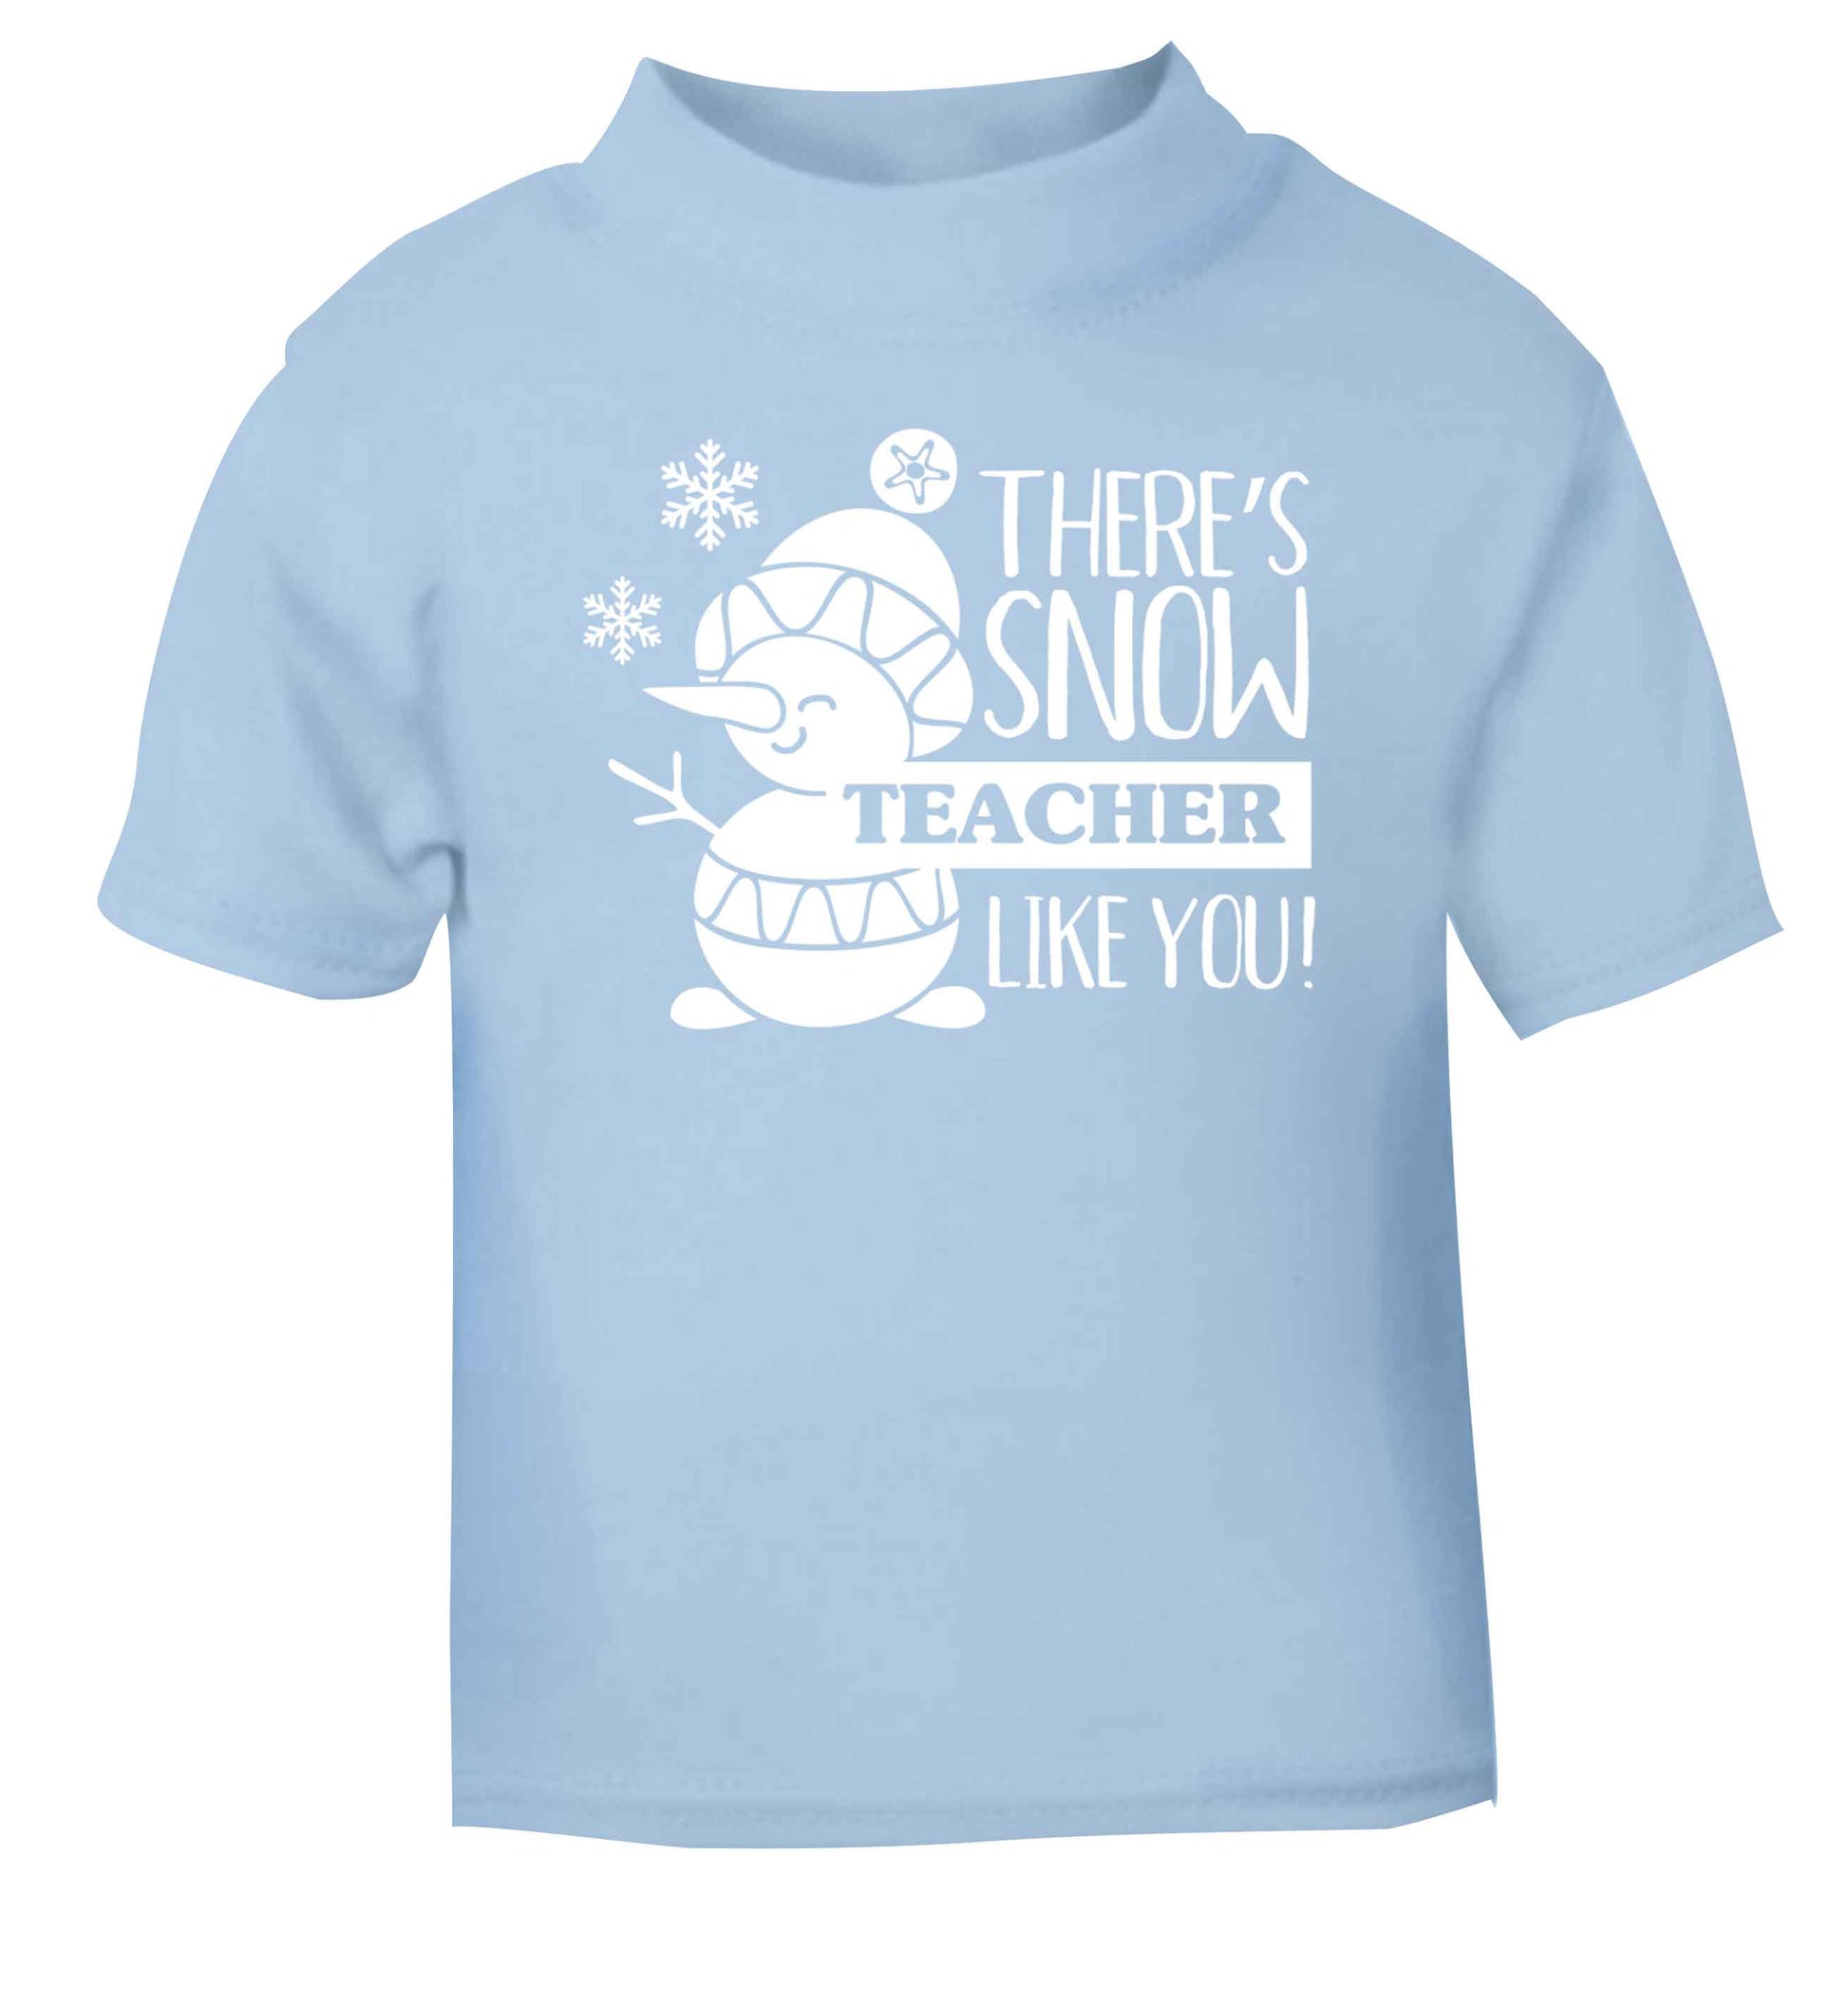 There's snow teacher like you light blue baby toddler Tshirt 2 Years